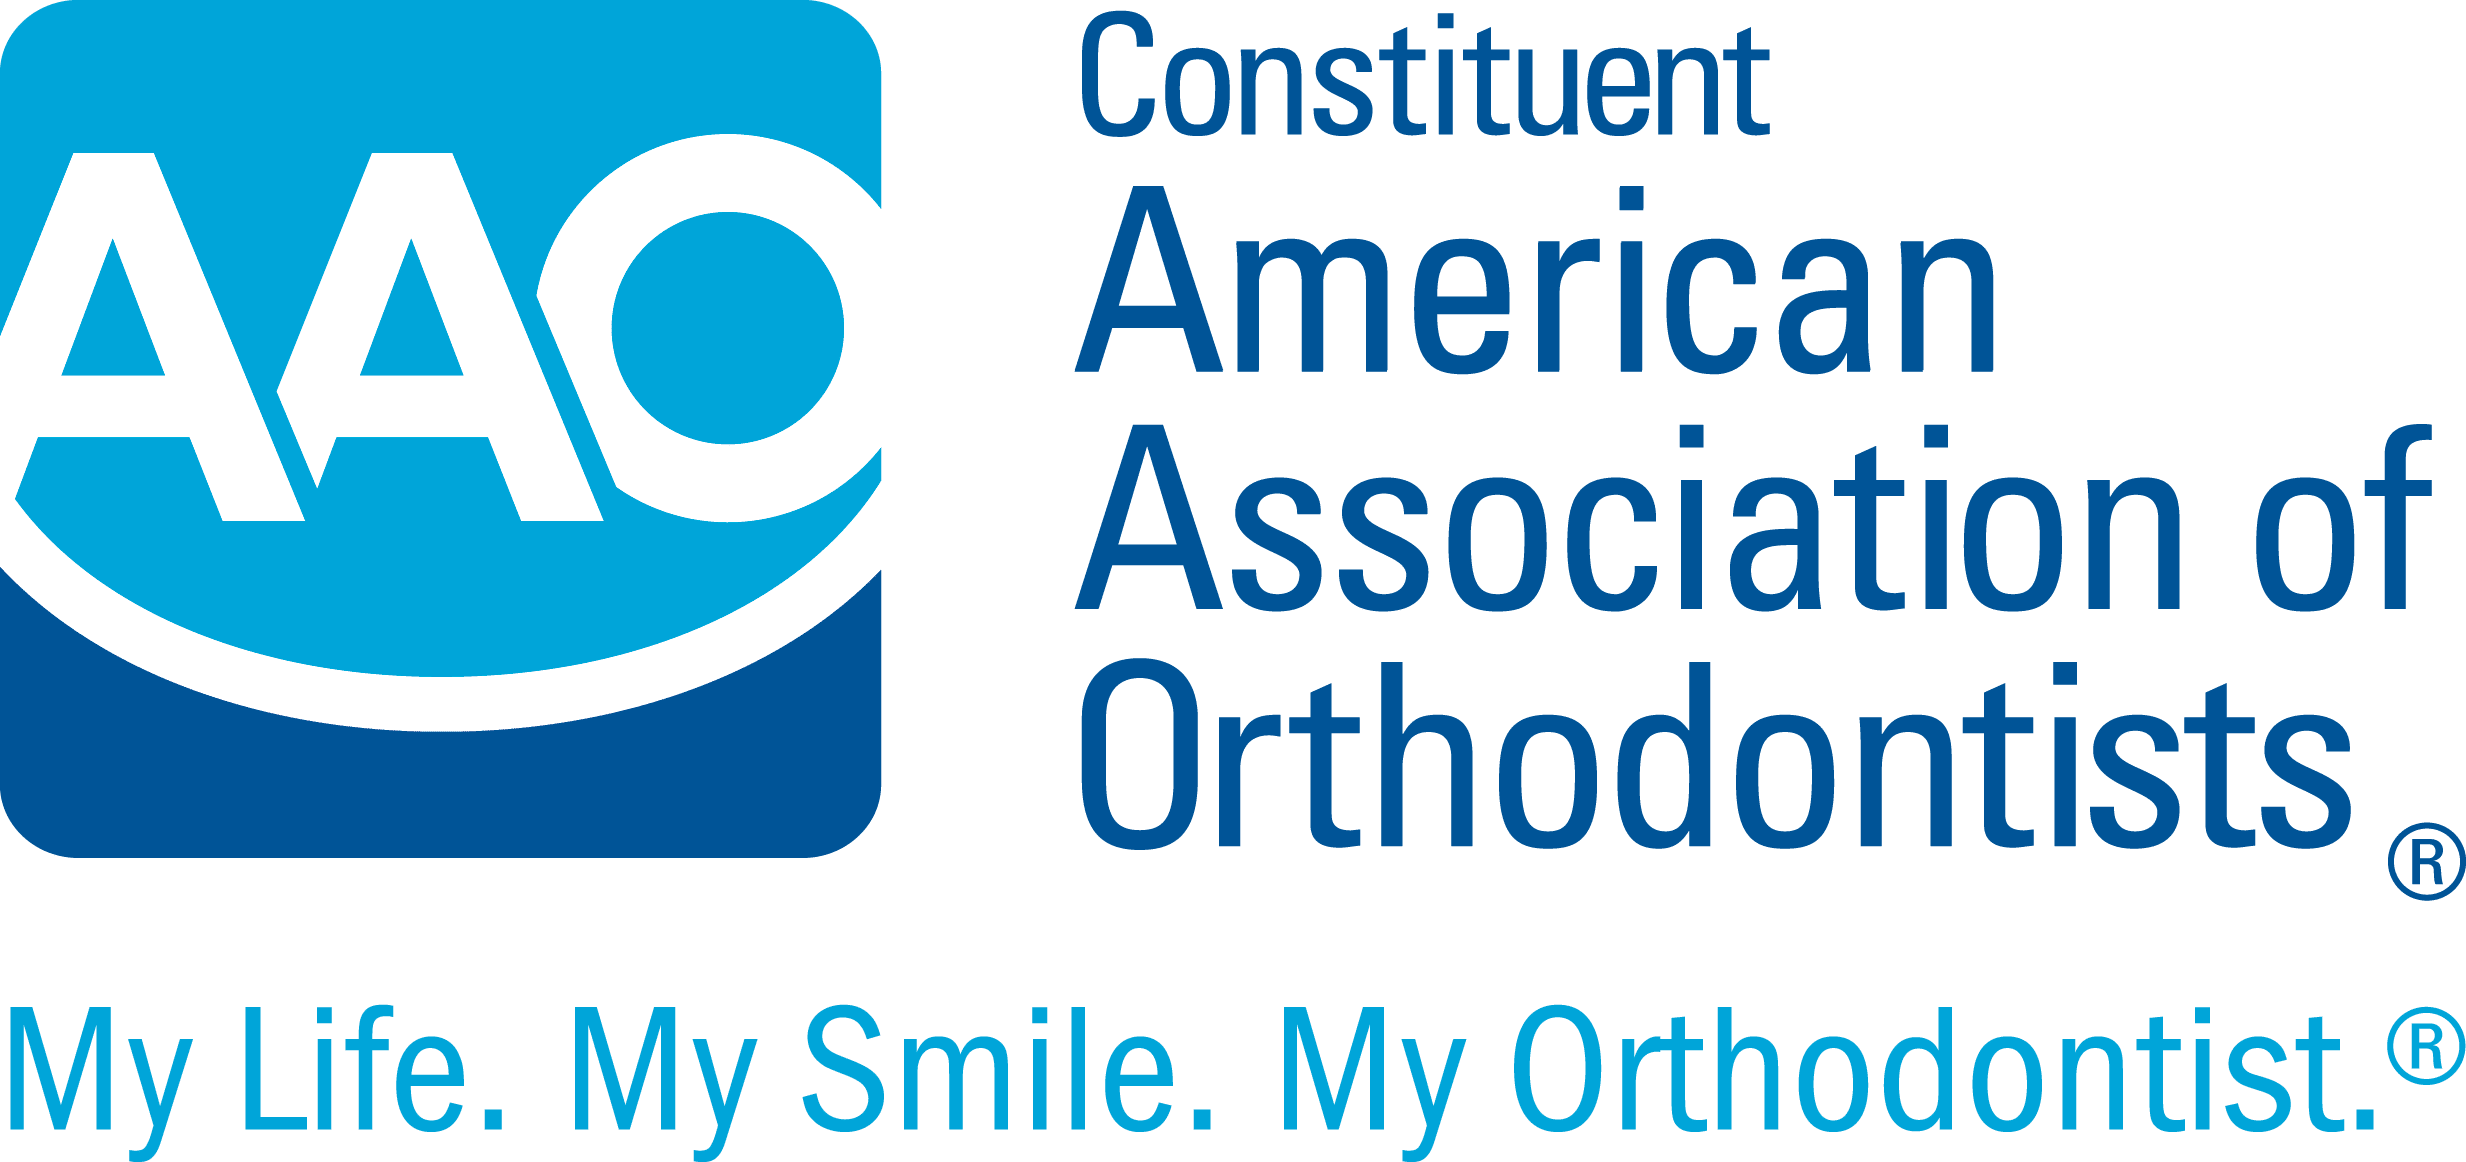 Aao American Associations Of Orthodontists Constituent